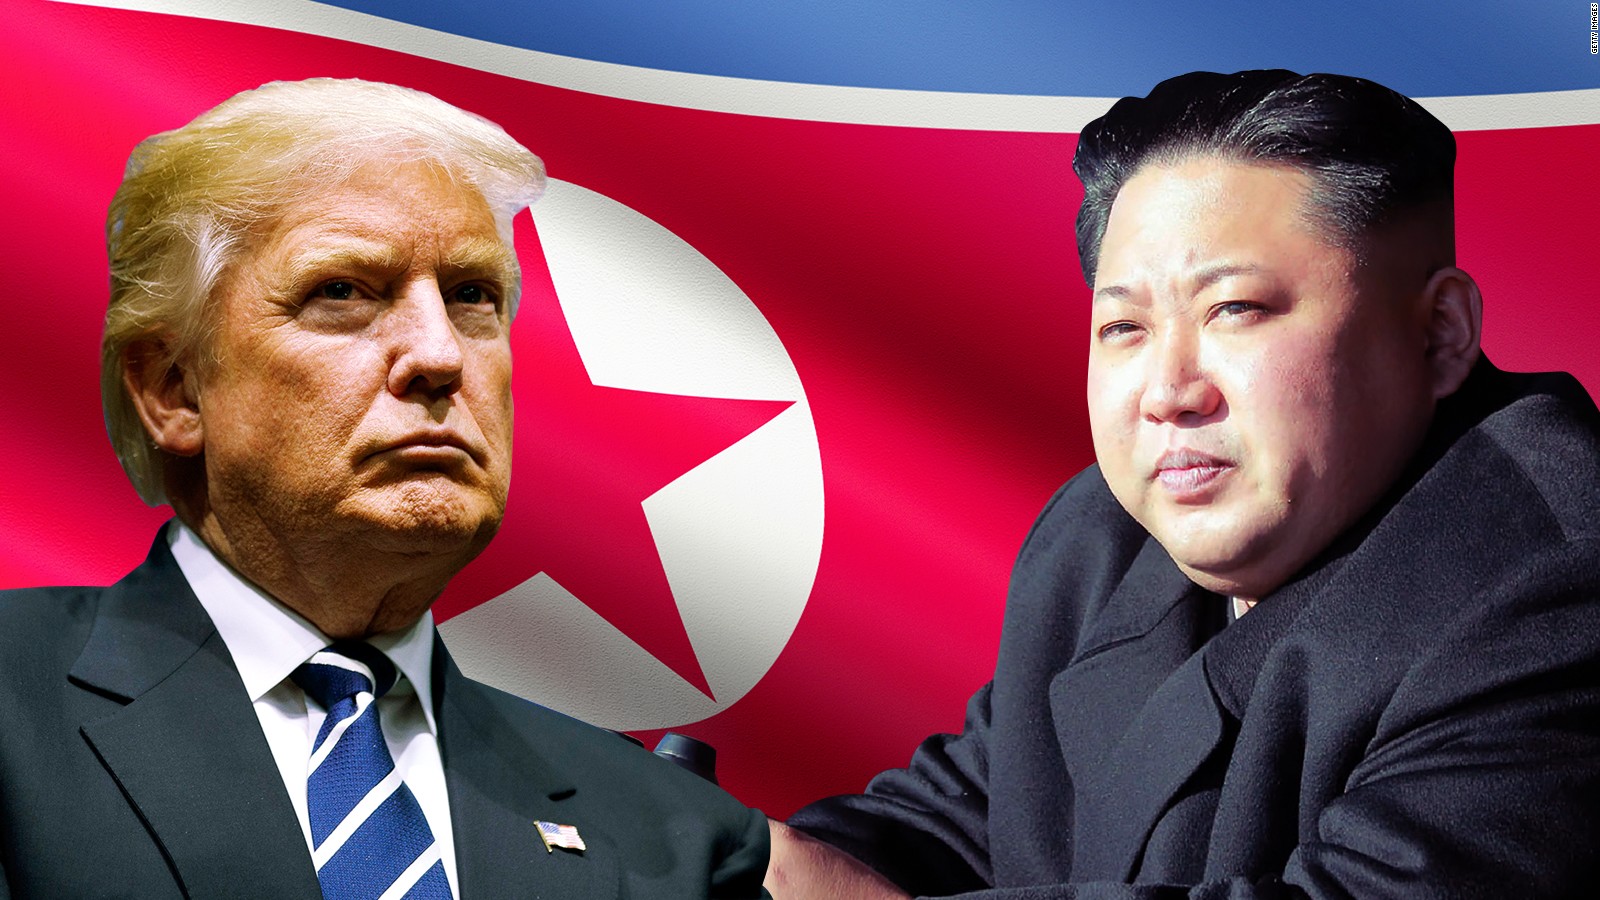 Titans fight: is the war between North Korea and the United States imminent?